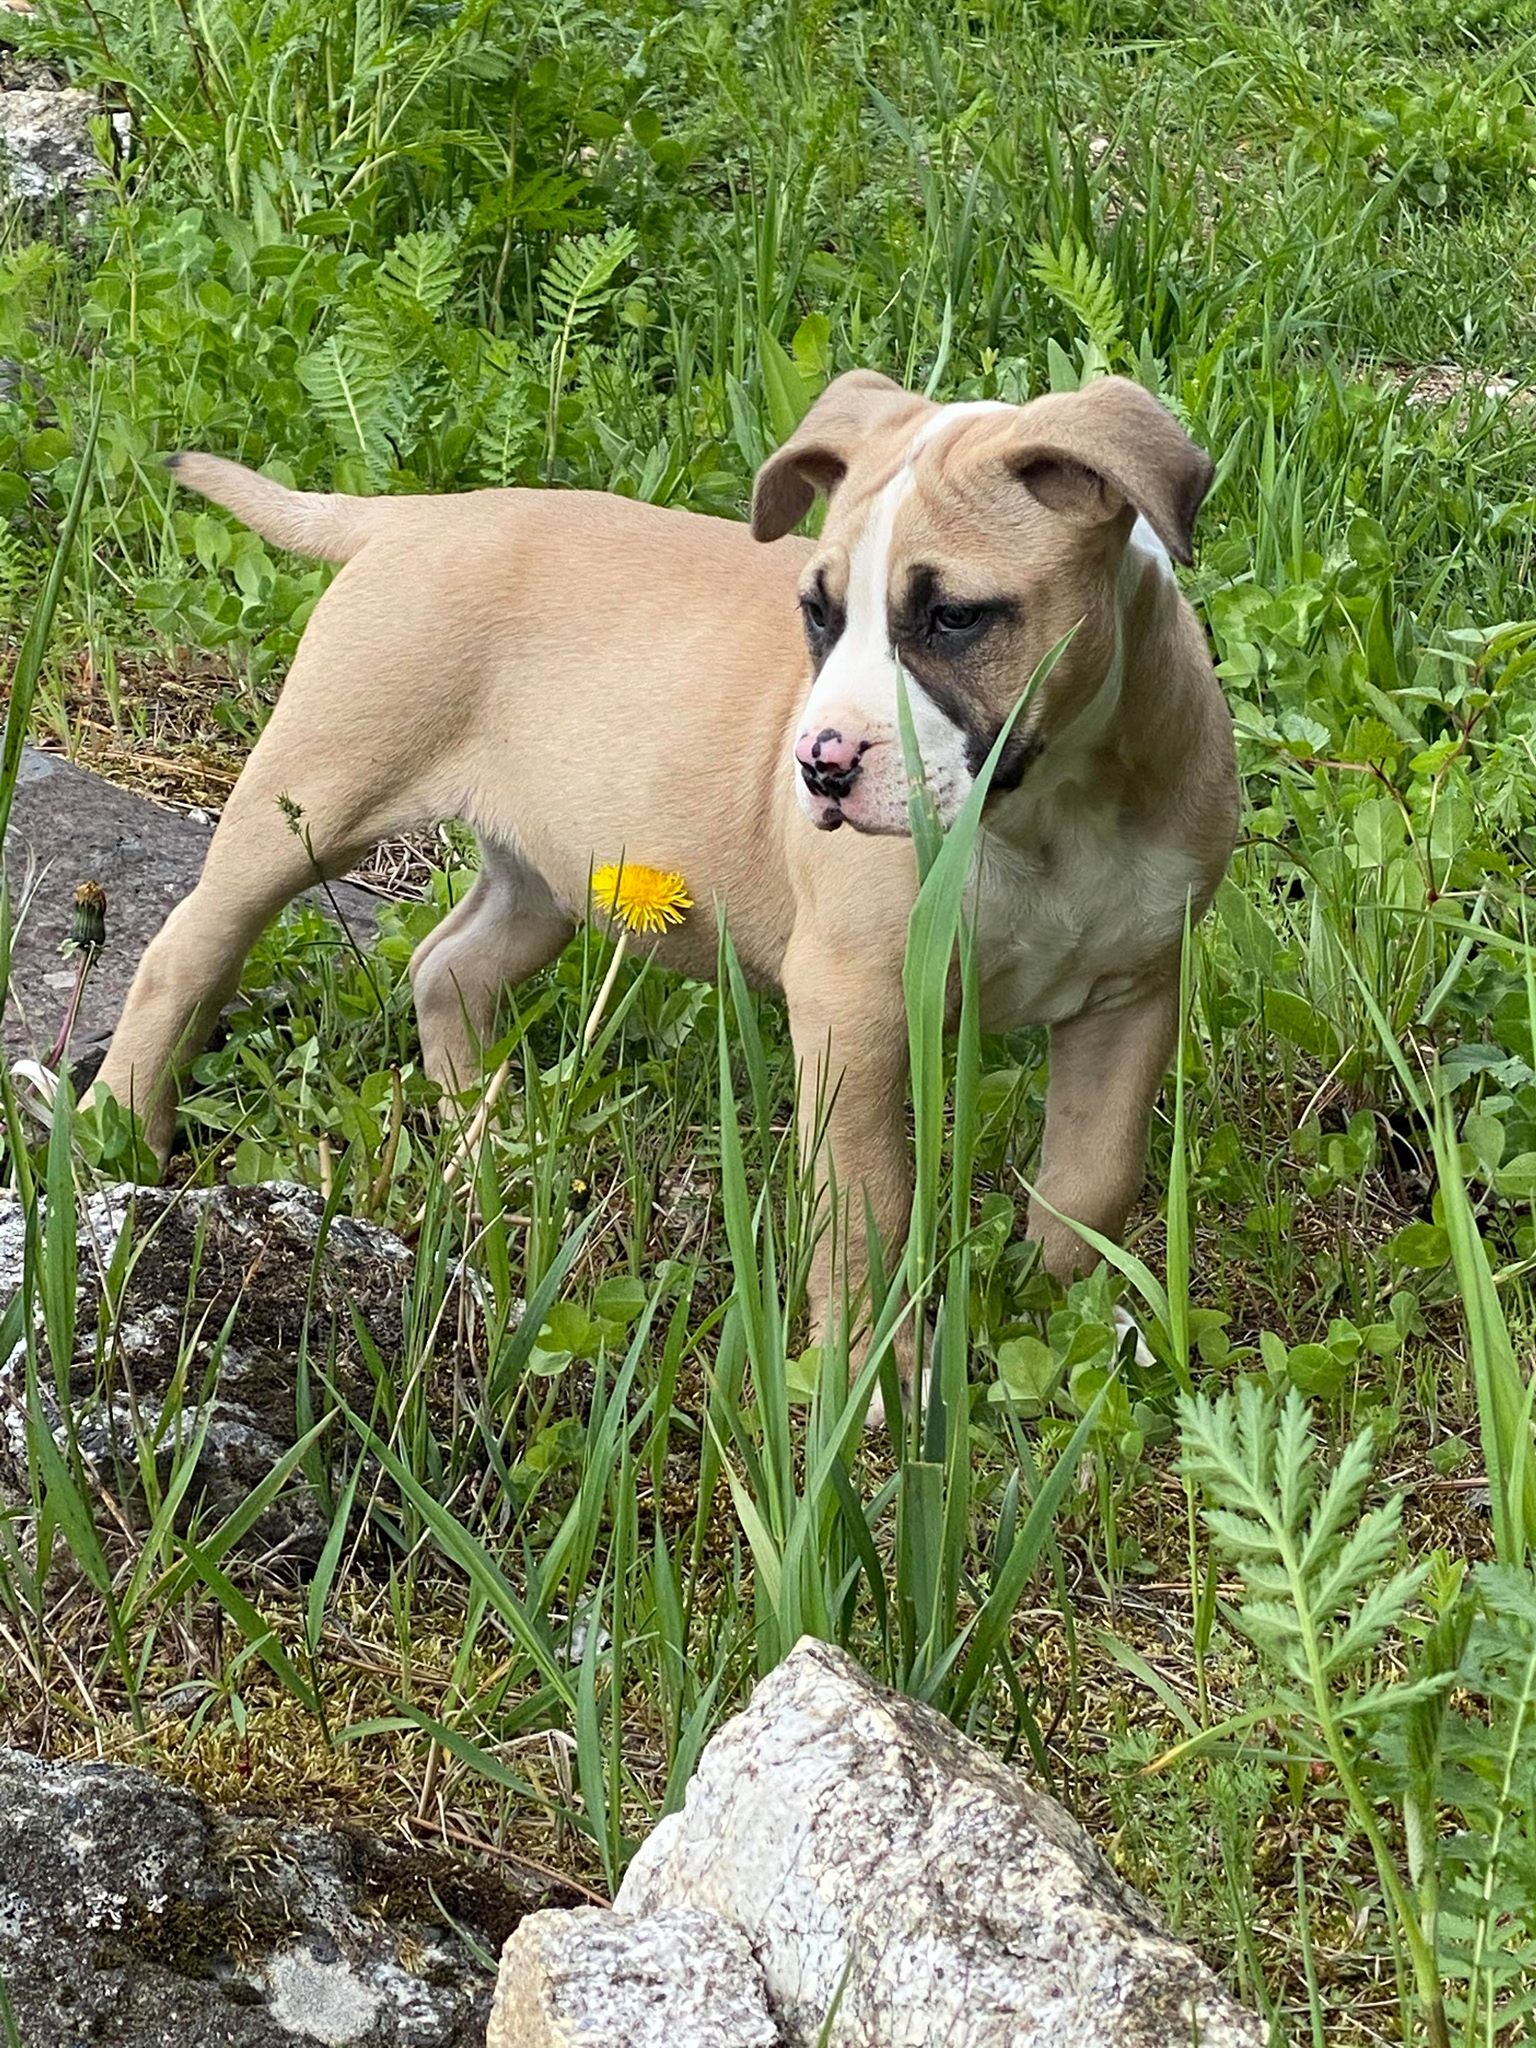 fawn apbt pup in the grass